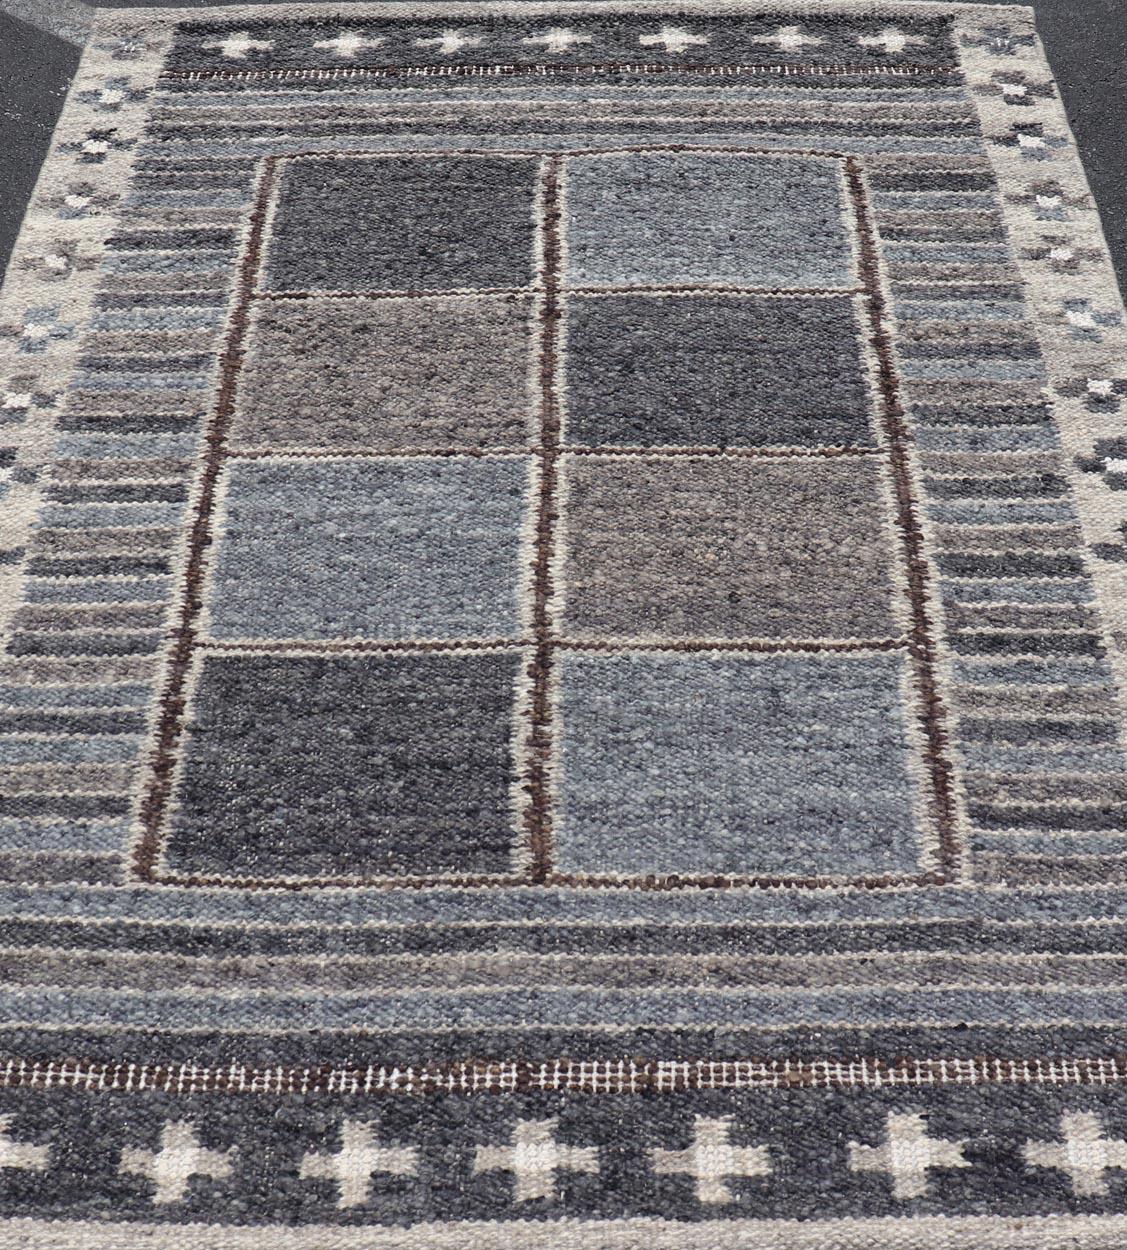 Modern Scandinavian/Swedish Design Rug in Blue, Charcoal, Gray and Cream For Sale 4